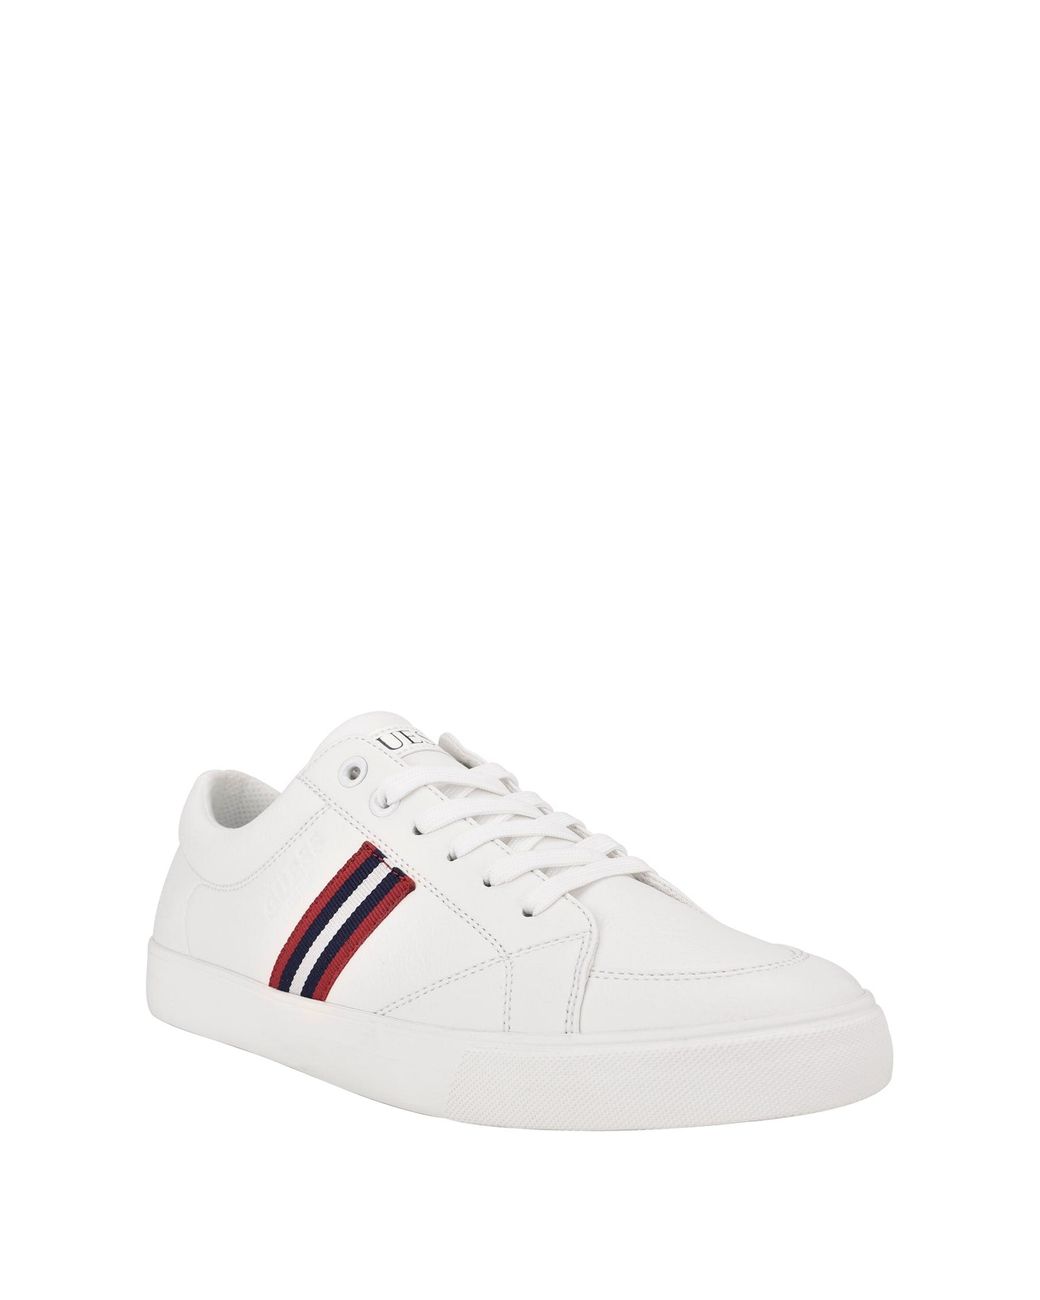 Guess Factory Masen Low-top Sneakers in White for Men | Lyst